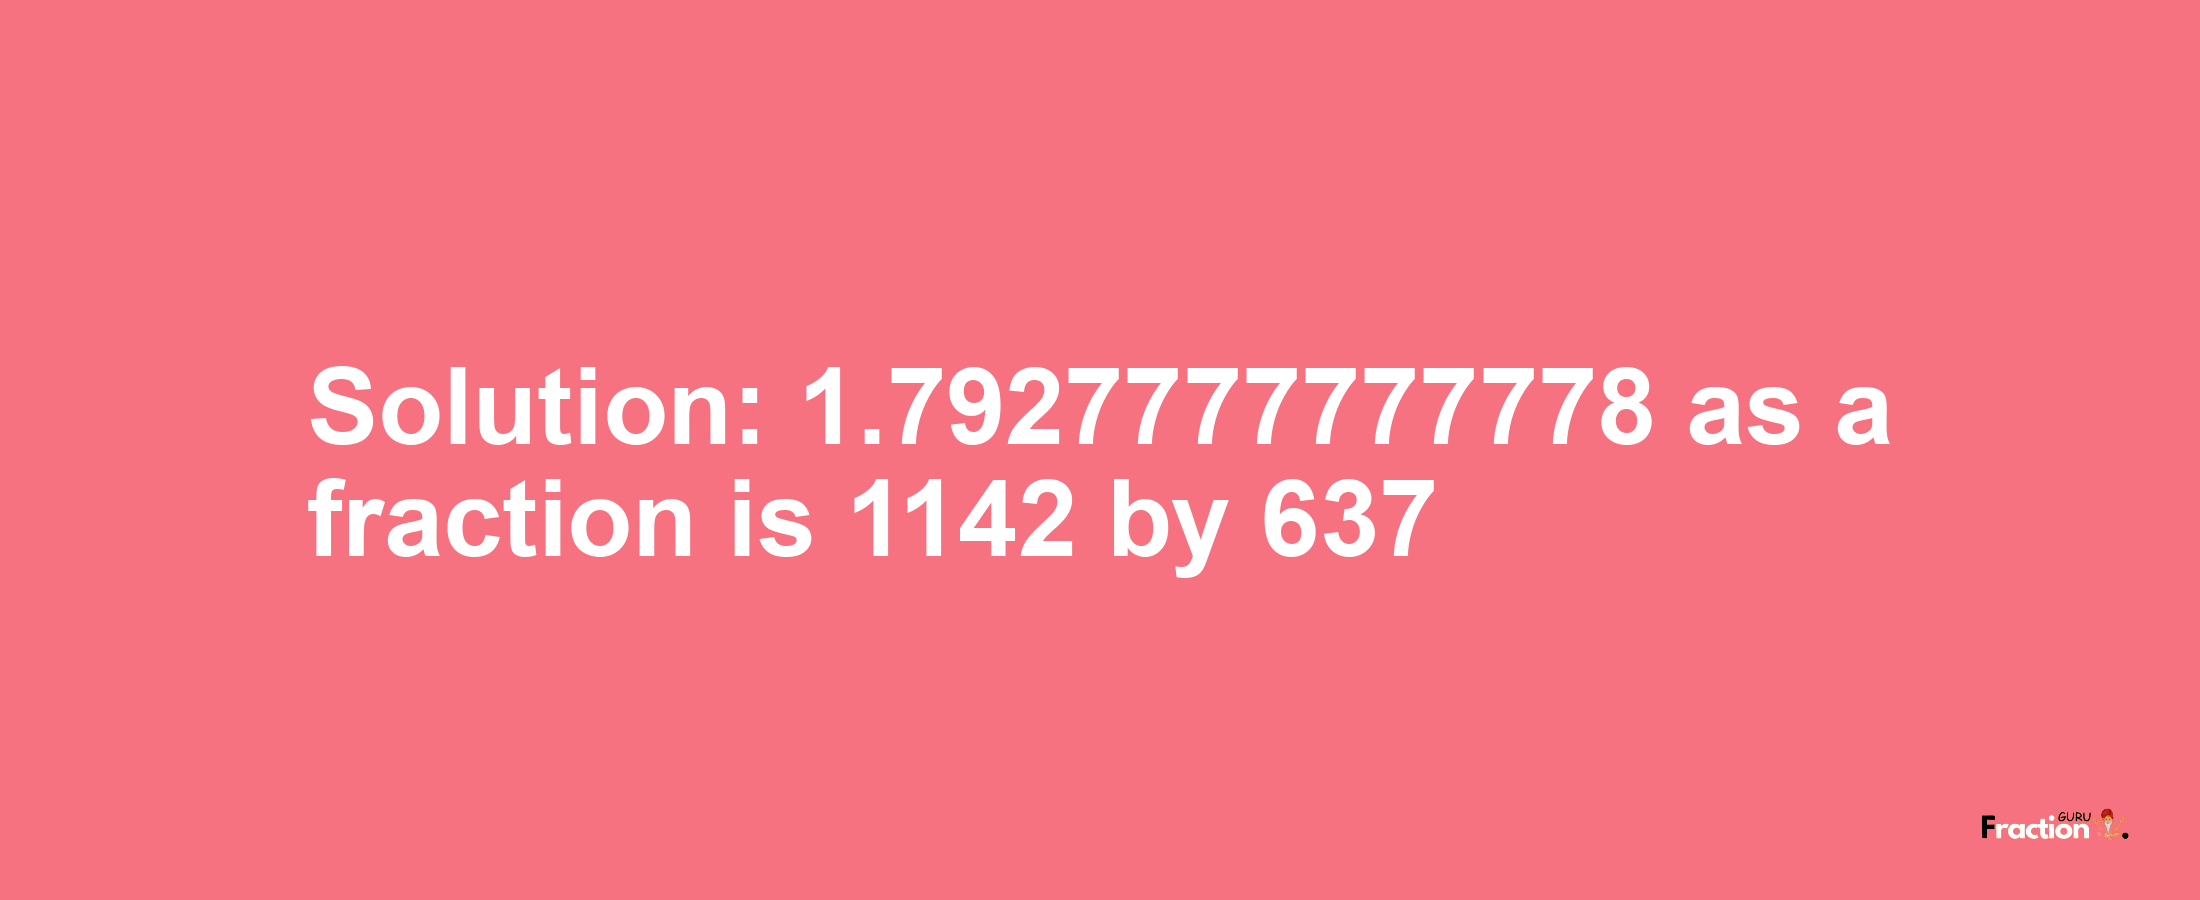 Solution:1.7927777777778 as a fraction is 1142/637